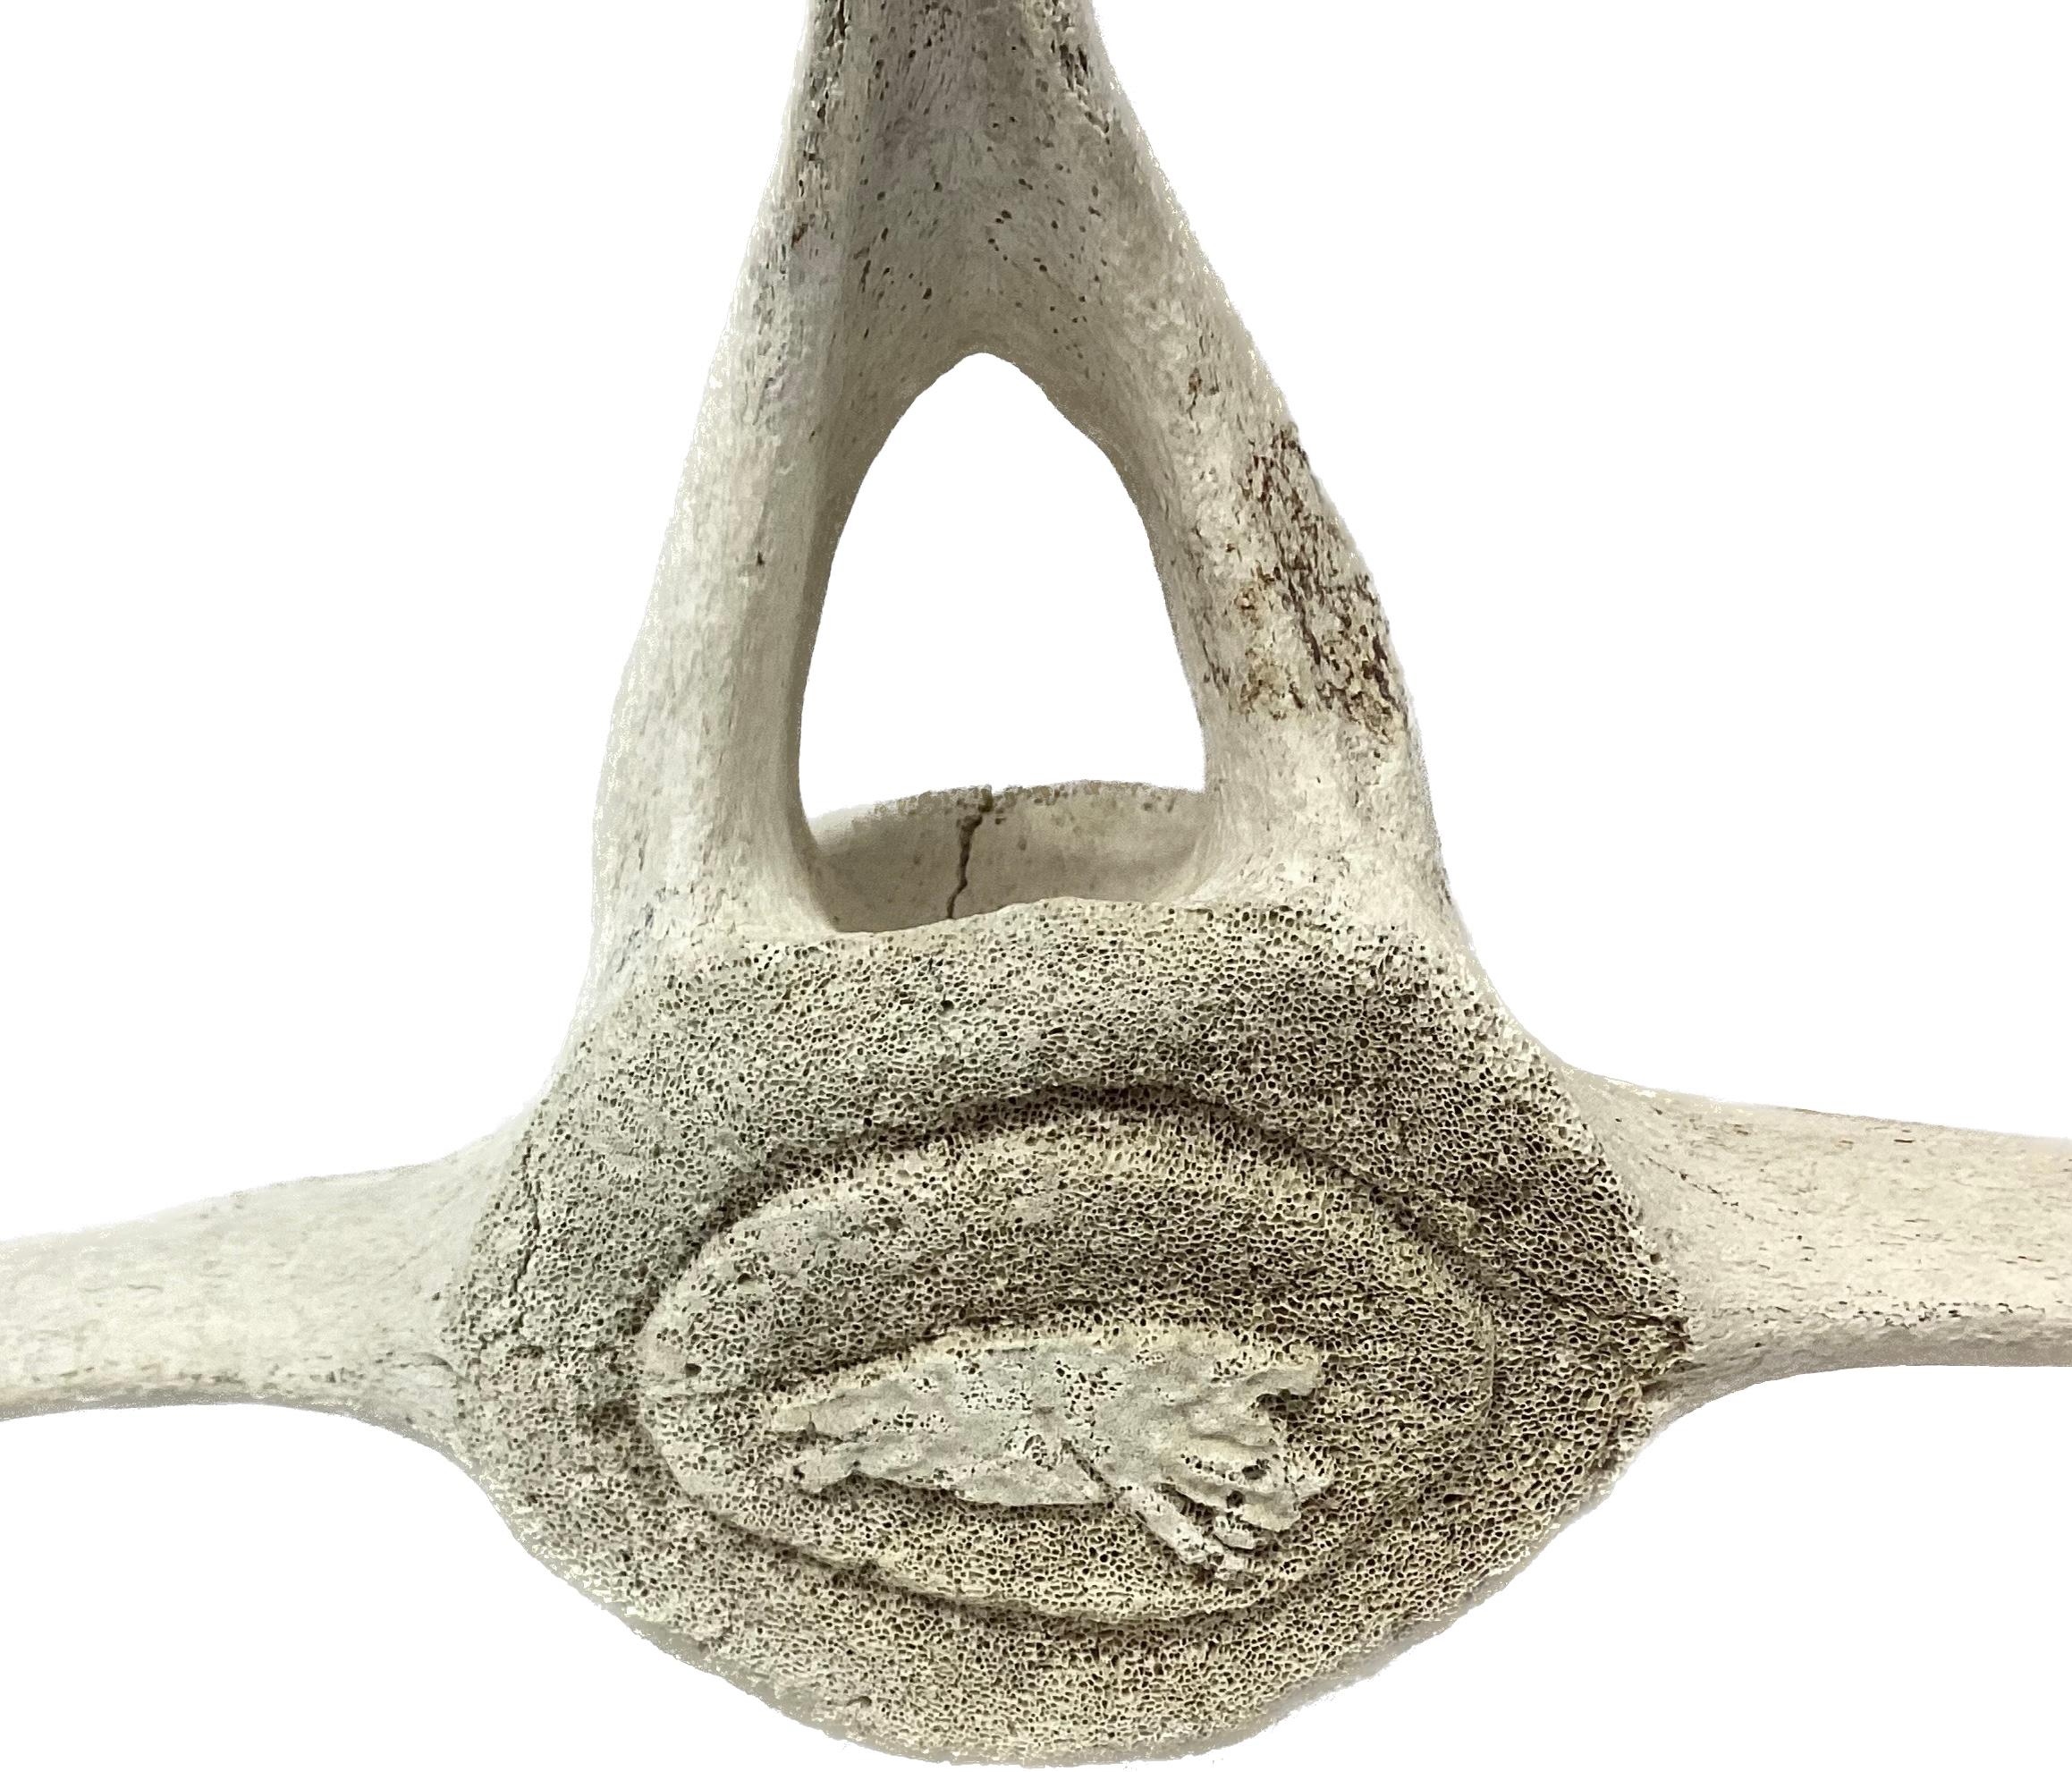 Fossilized Carved Whale Vertebrae #16 In Good Condition For Sale In Bradenton, FL